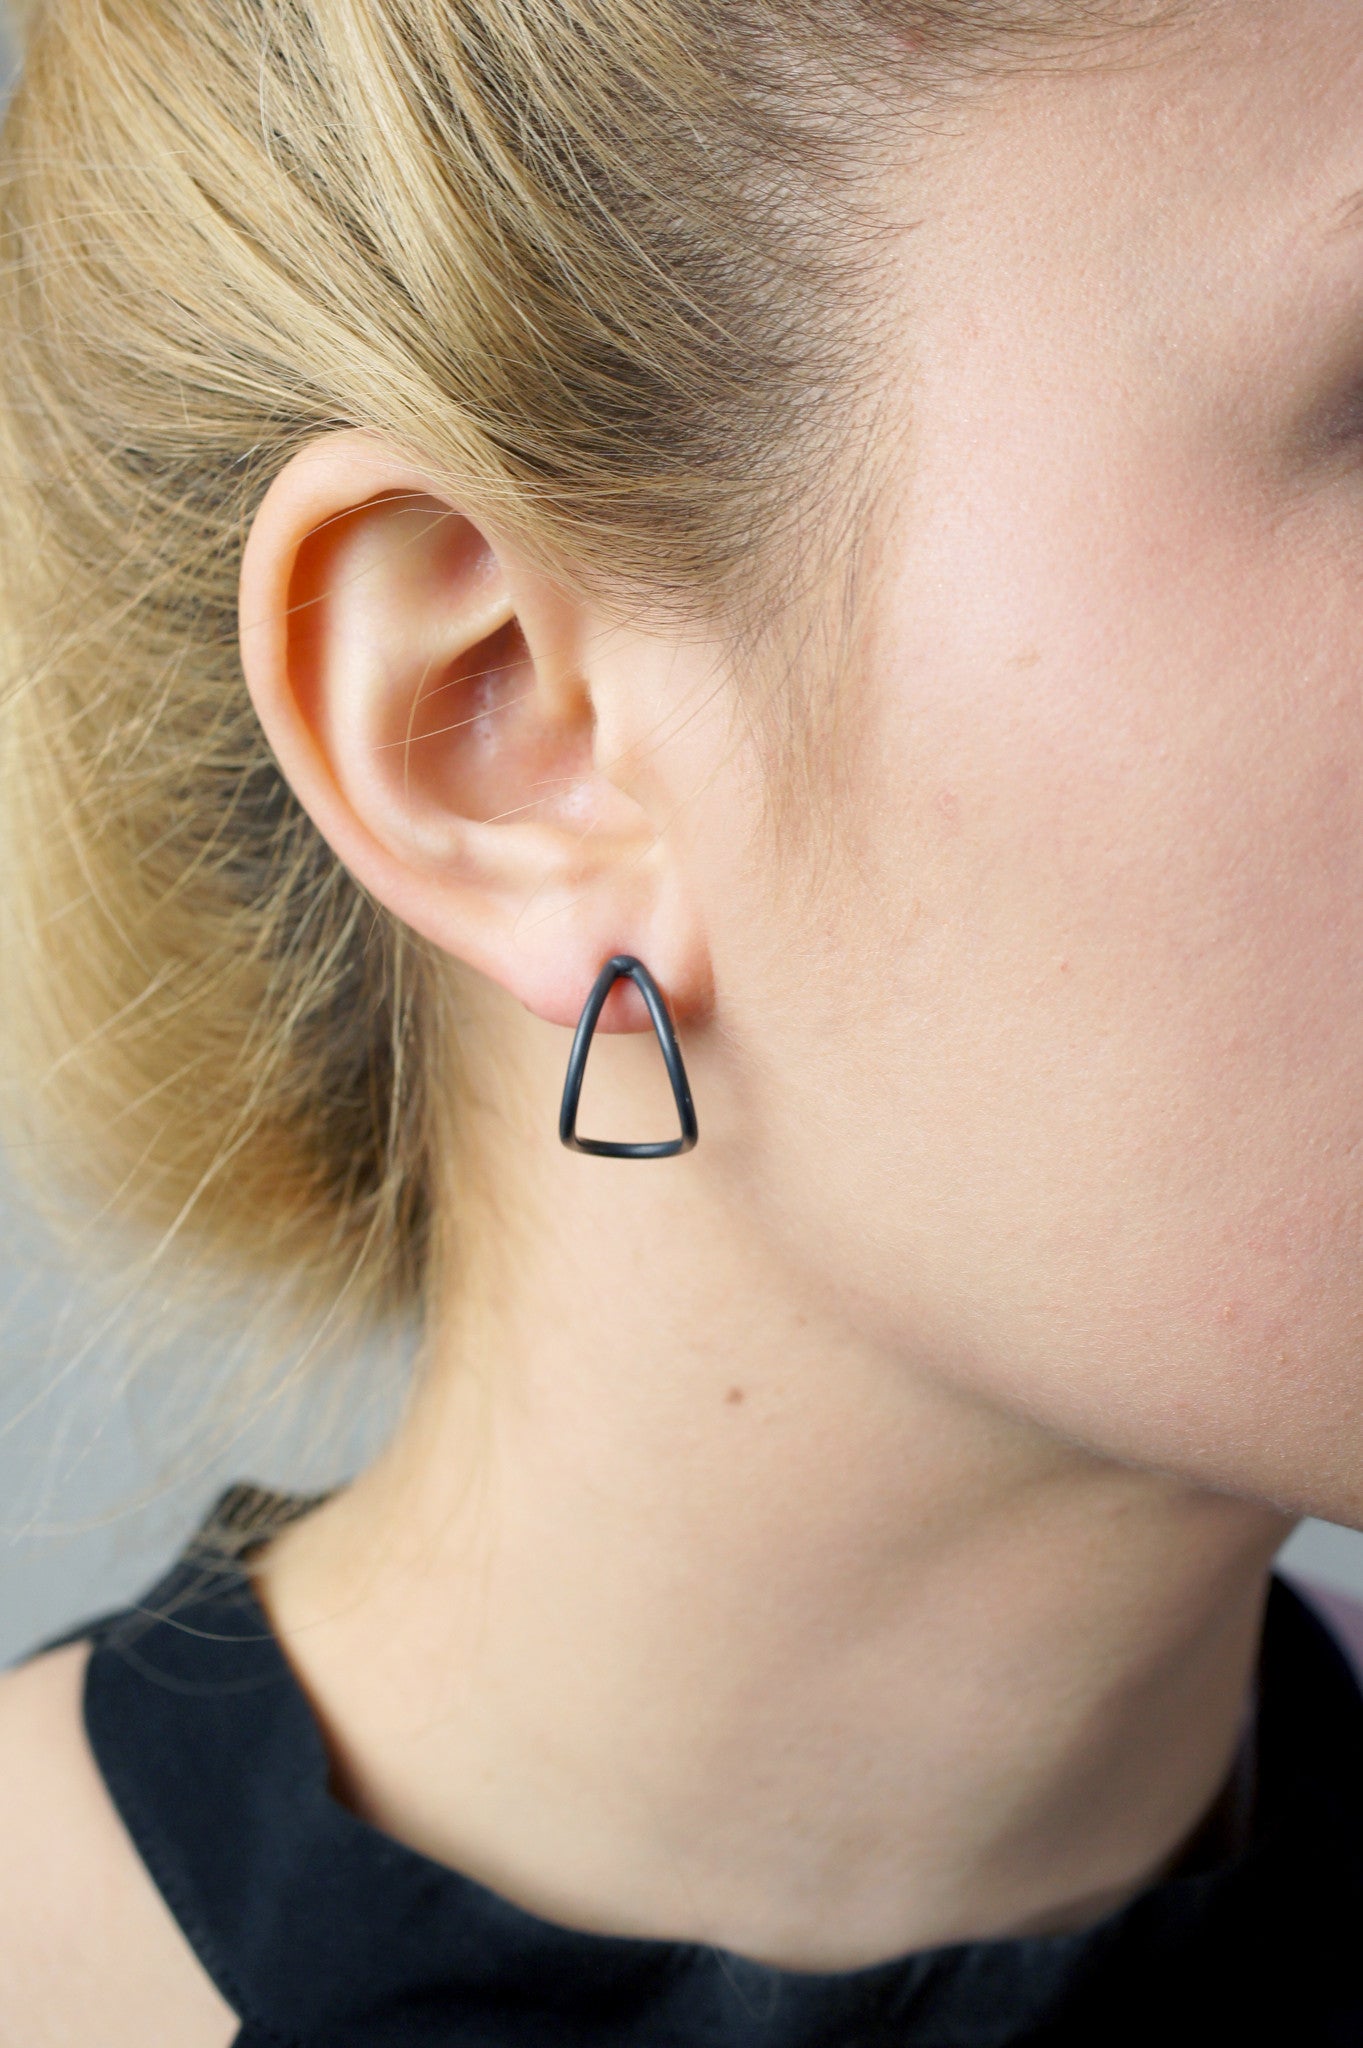 small curve post earrings in black